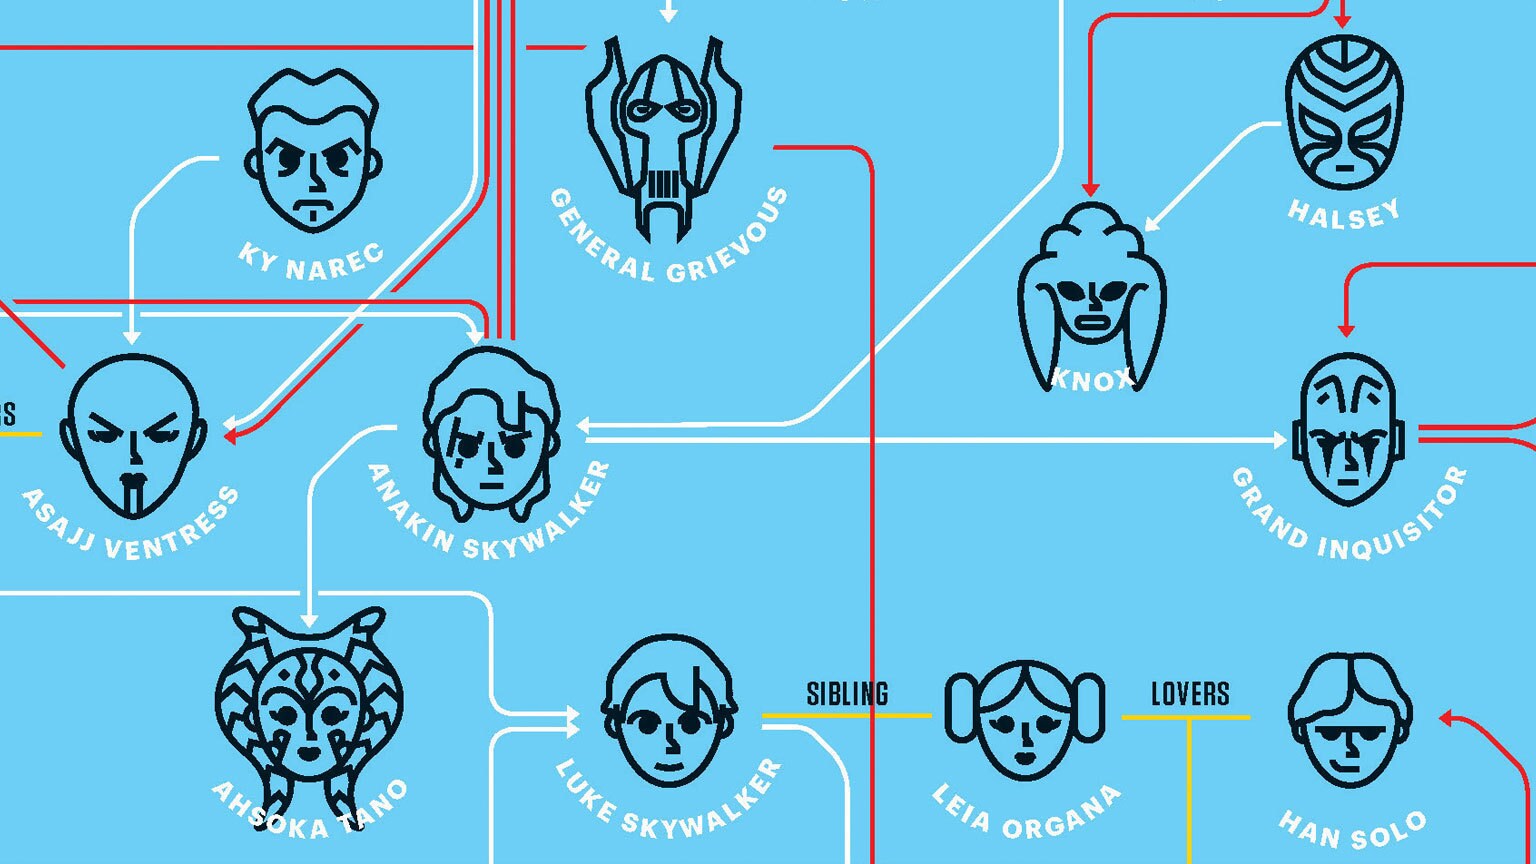 How Star Wars Super Graphic Brilliantly Explains and Connects the Saga